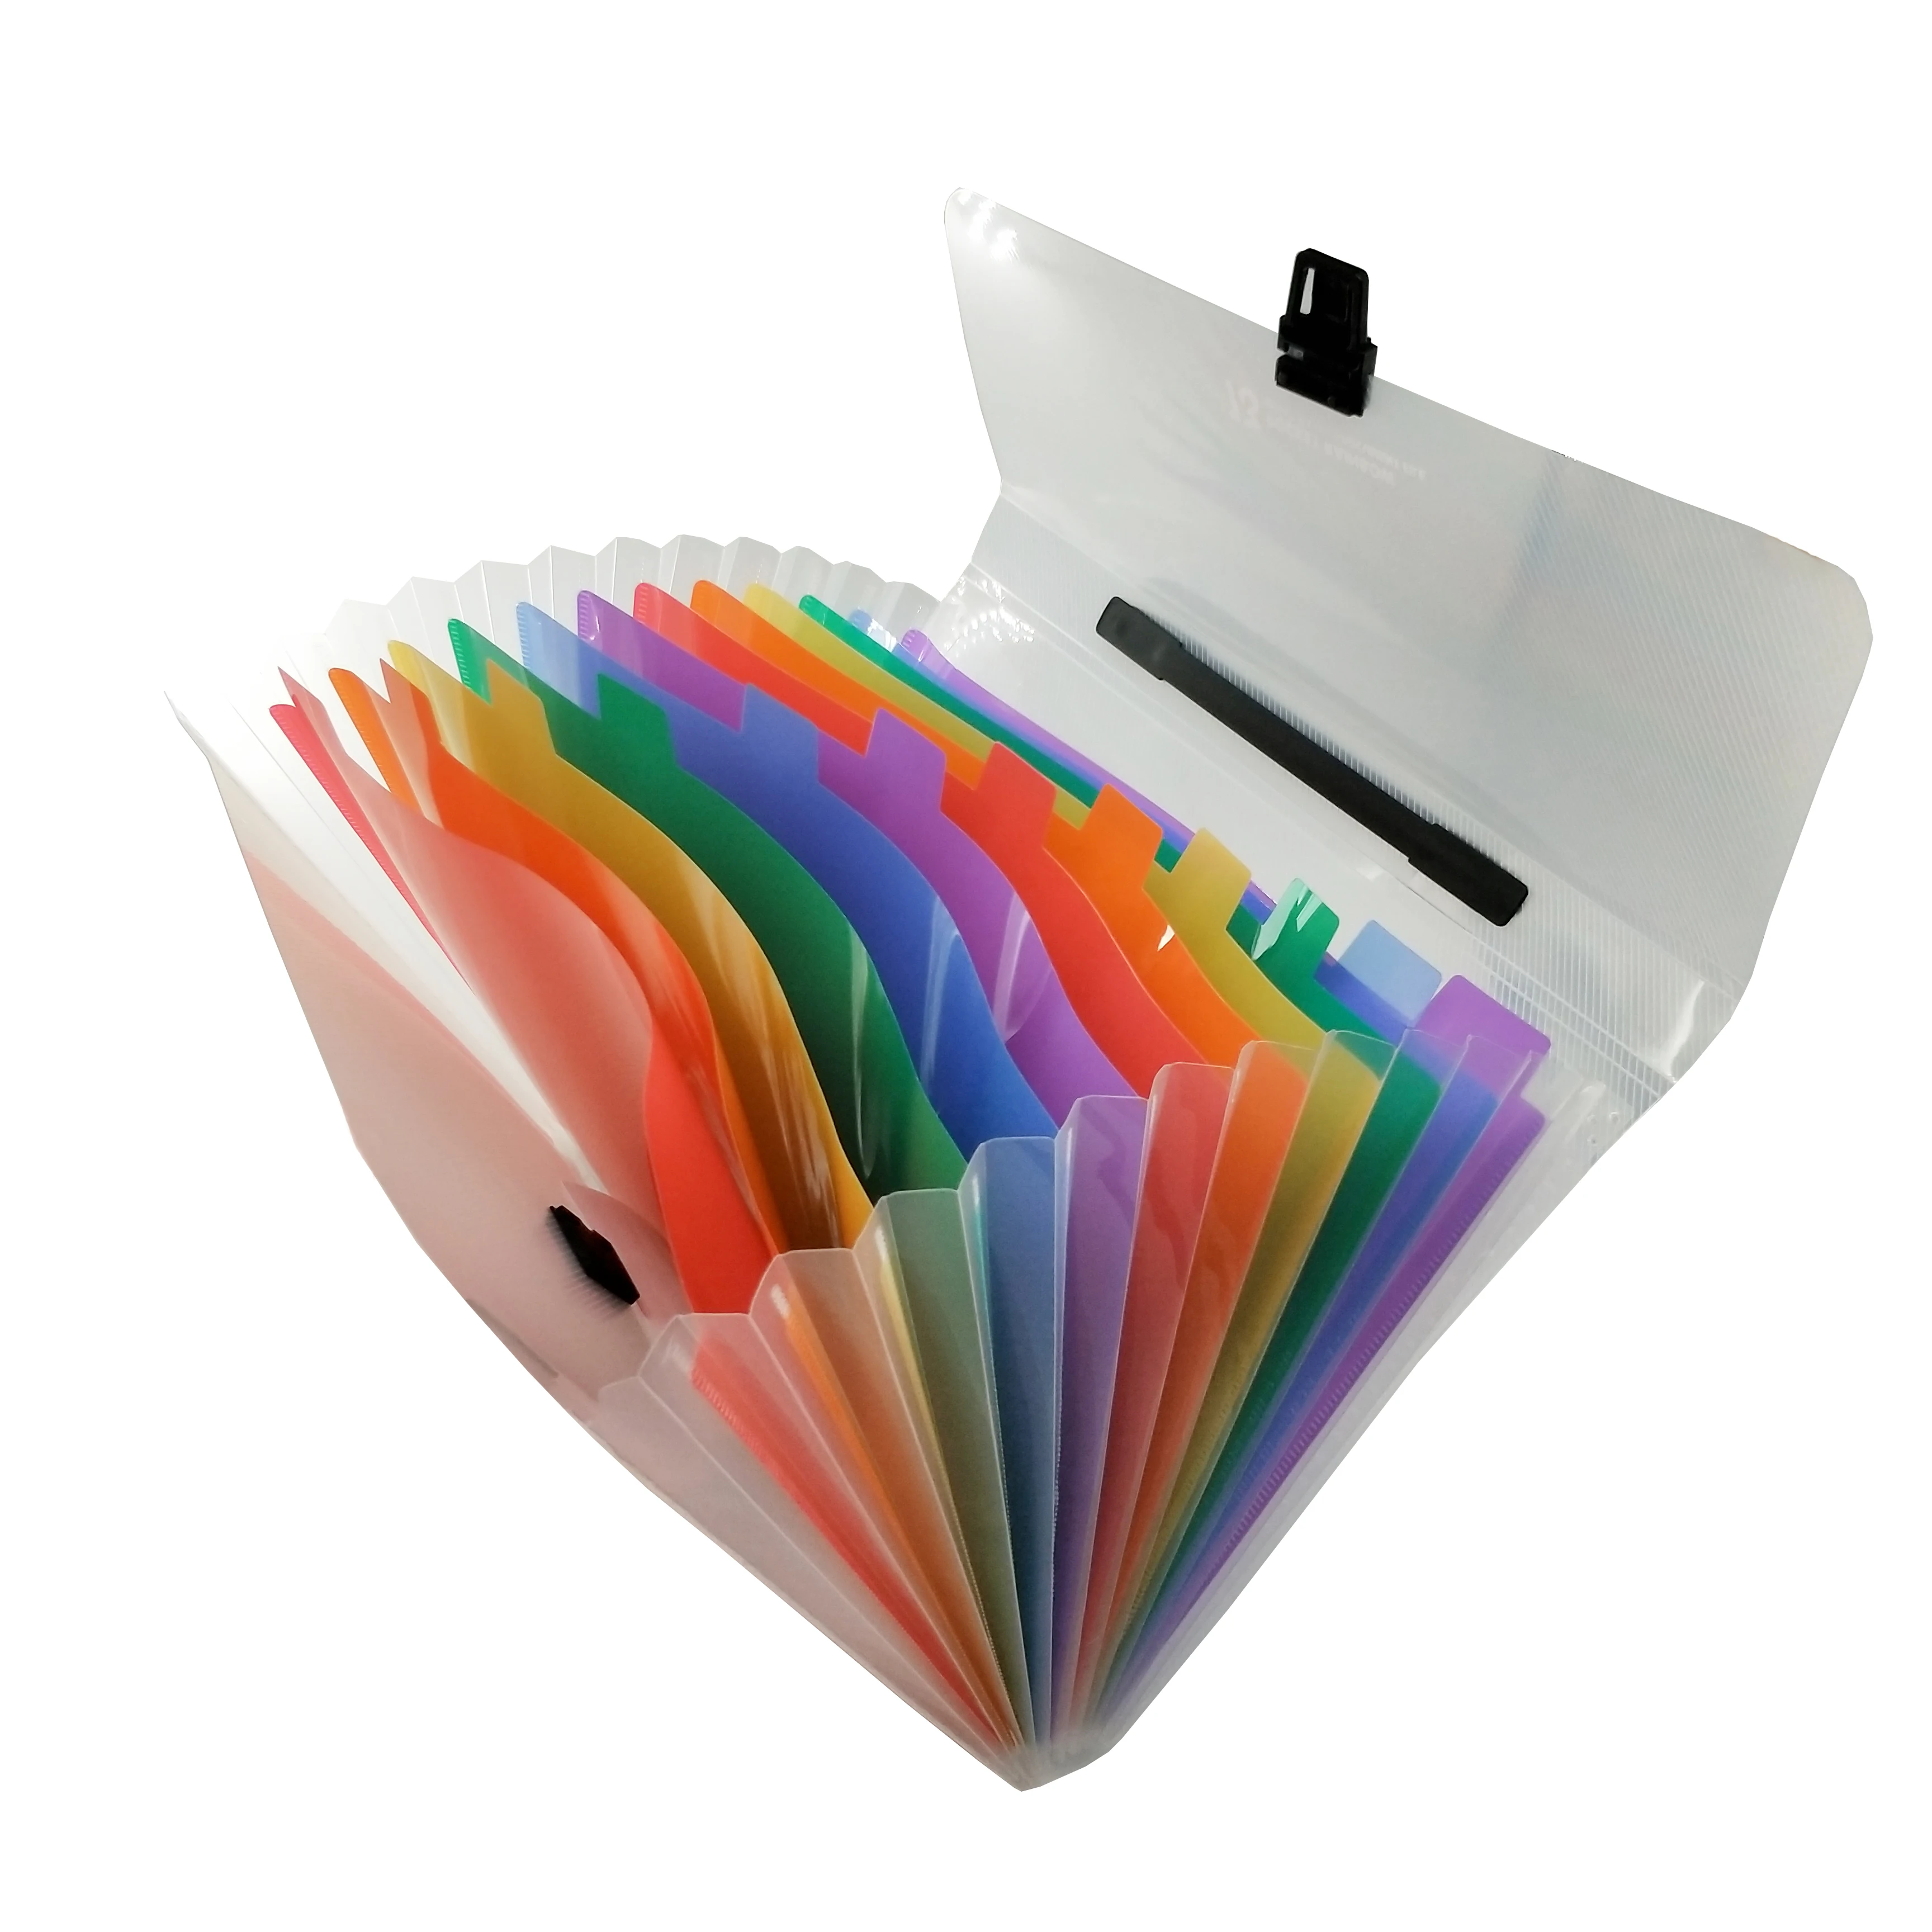 
13 Pockets-Handle Portable Expandable Multicolor A4 Accordion File Folder for Business Office 